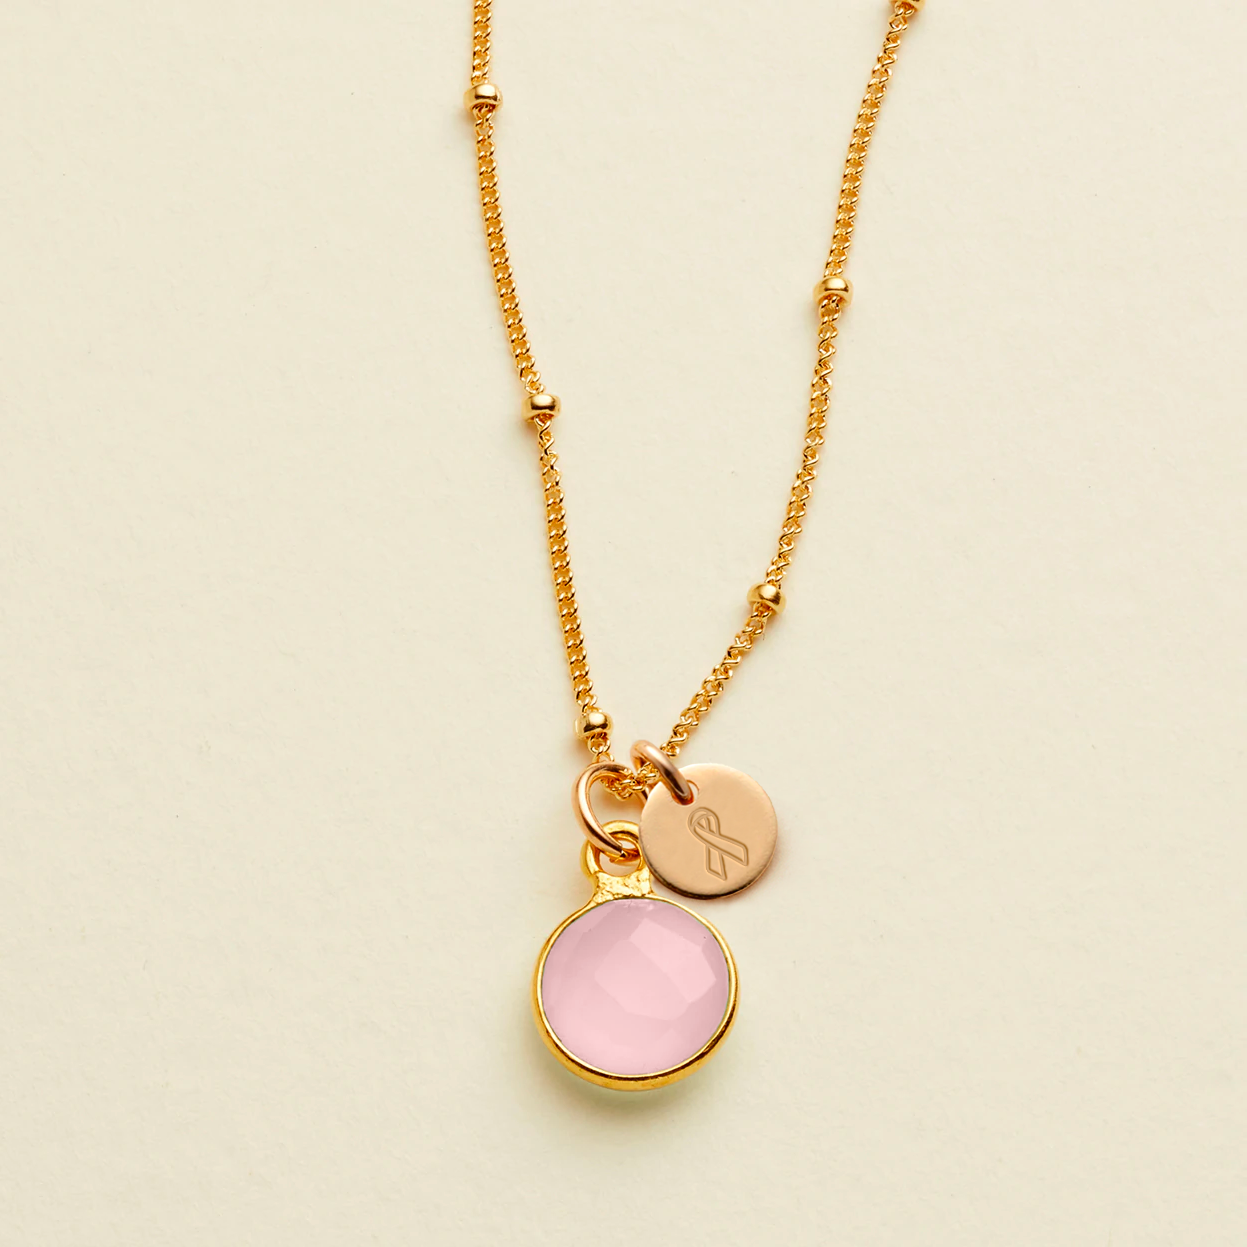 Cancer Awareness Necklace Gold Filled / Breast Necklace